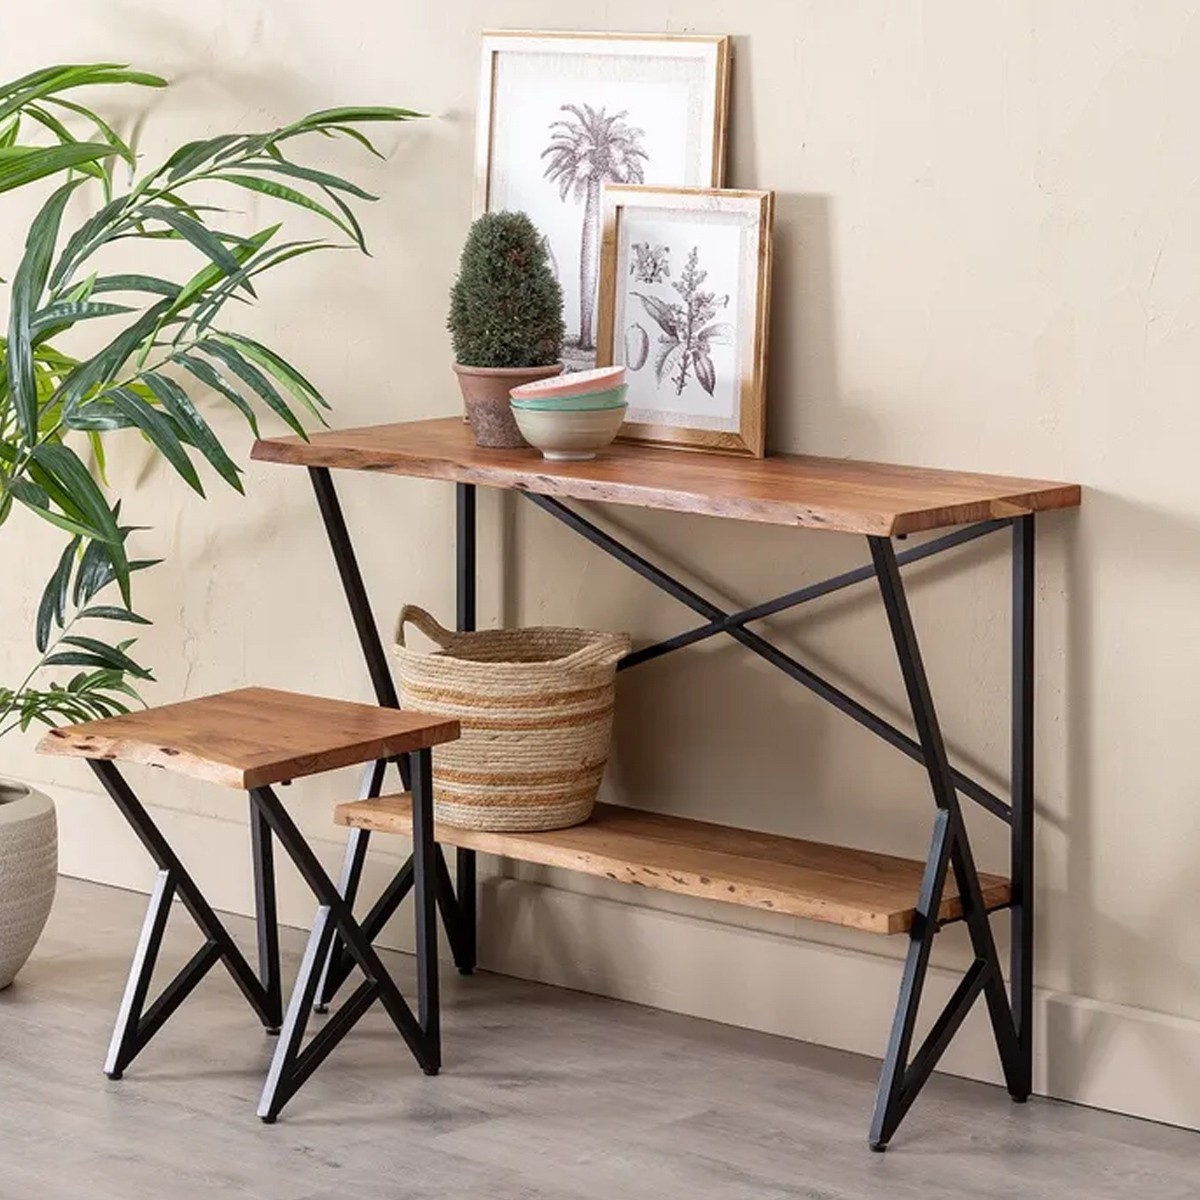 Natural console table.